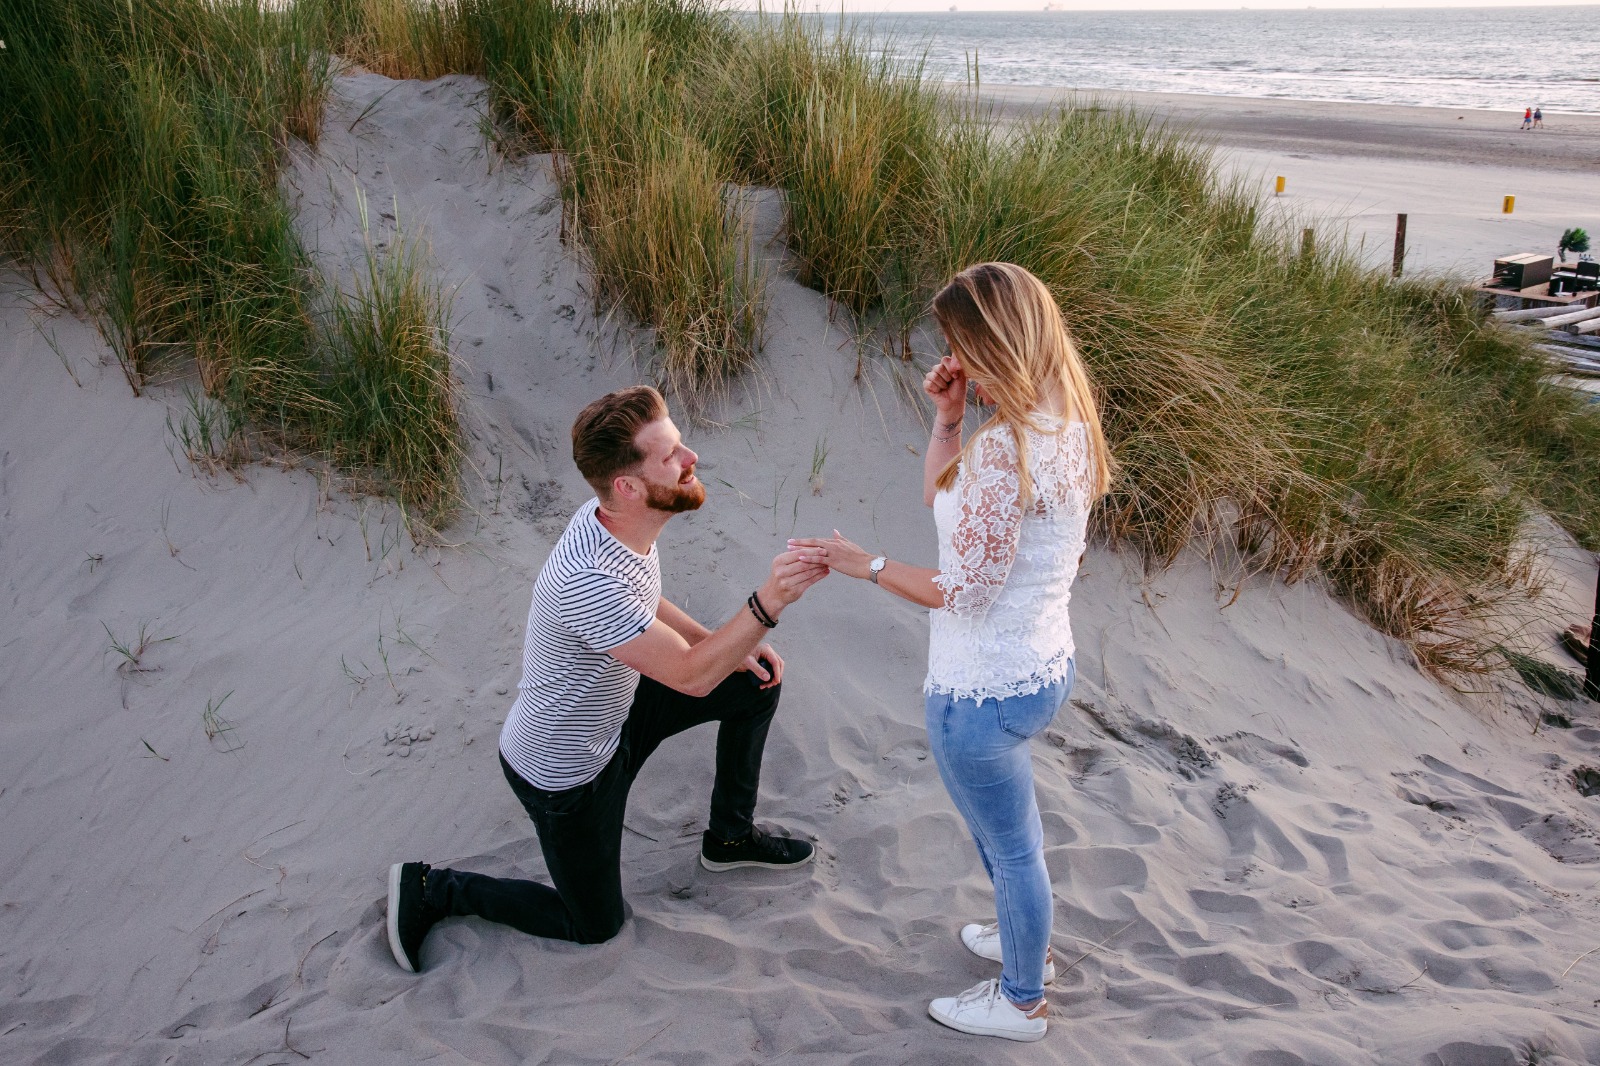 A man makes a romantic marriage proposal to a woman on the beach.